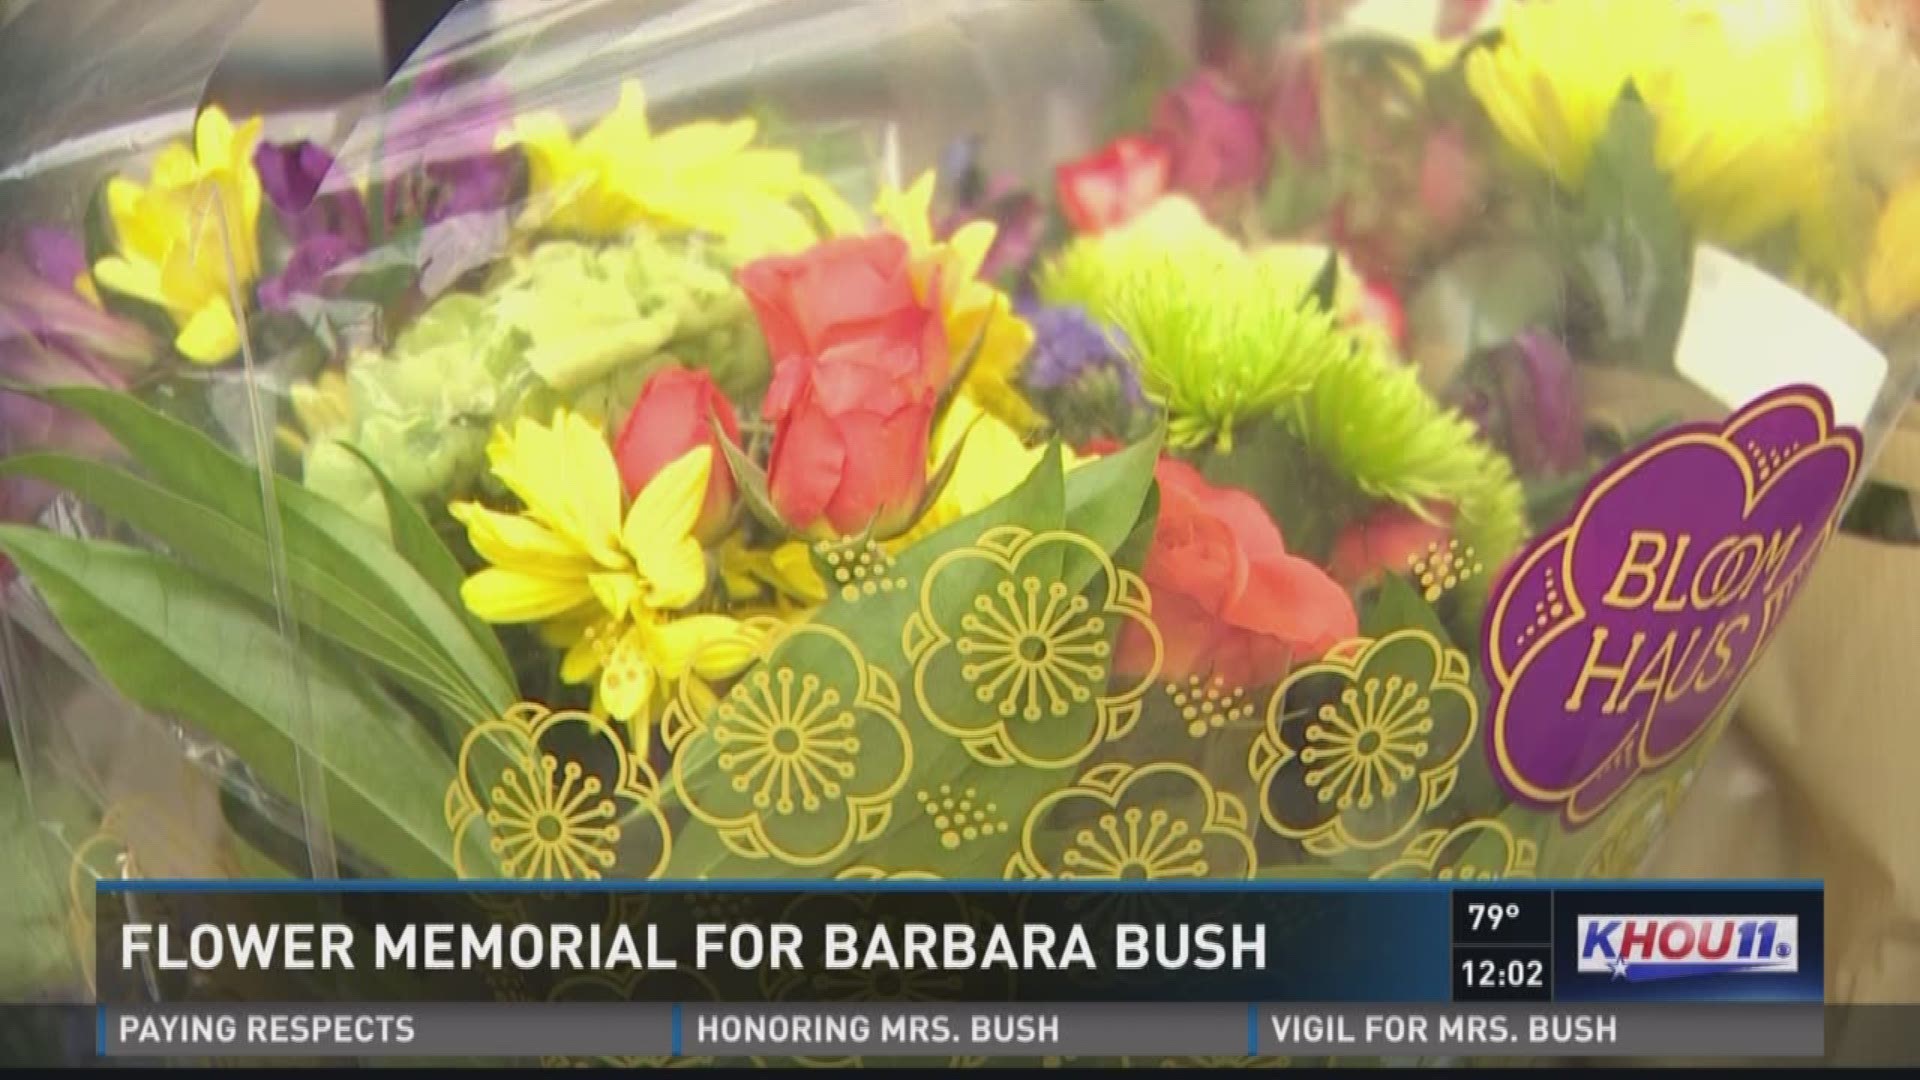 A growing flower memorial honoring former First Lady Barbara Bush has been moved from the front of the entrance to their neighborhood to a new location.